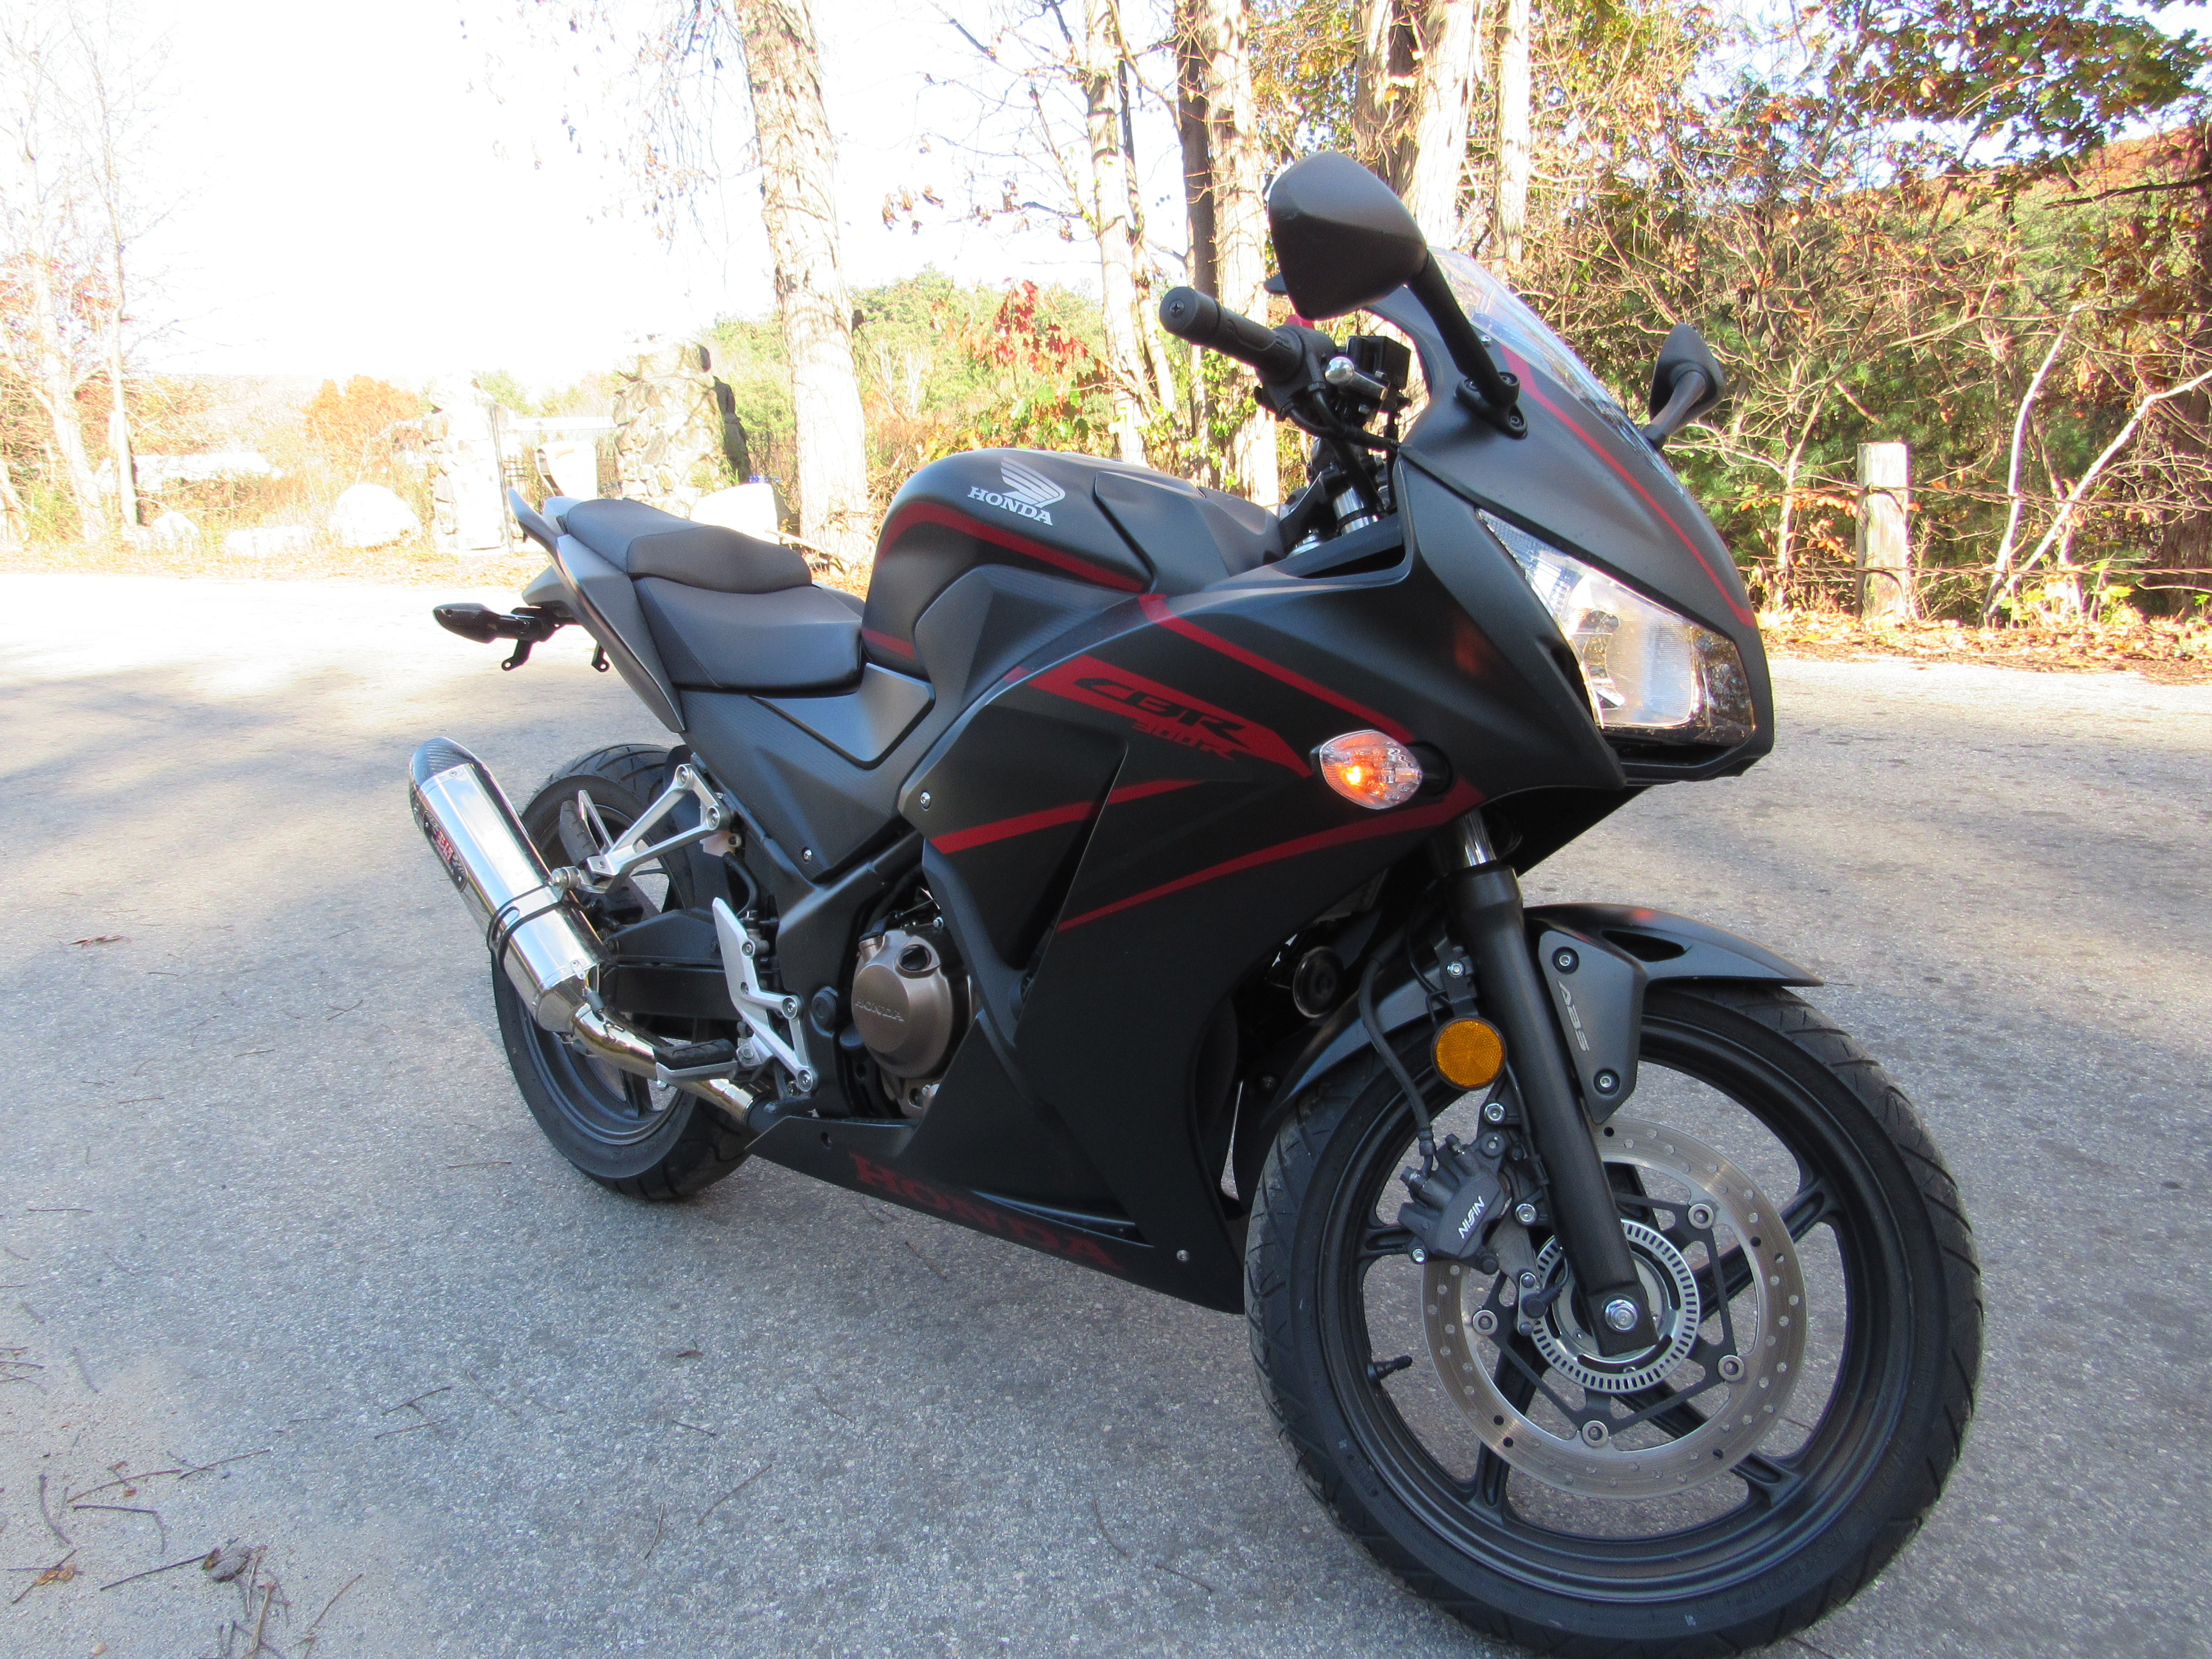 2019 CBR 300R LIKE NEW WITH 1,312 MILES CBR 300R LIKE NEW WITH 1,312 MILES 0177 - Click for larger photo